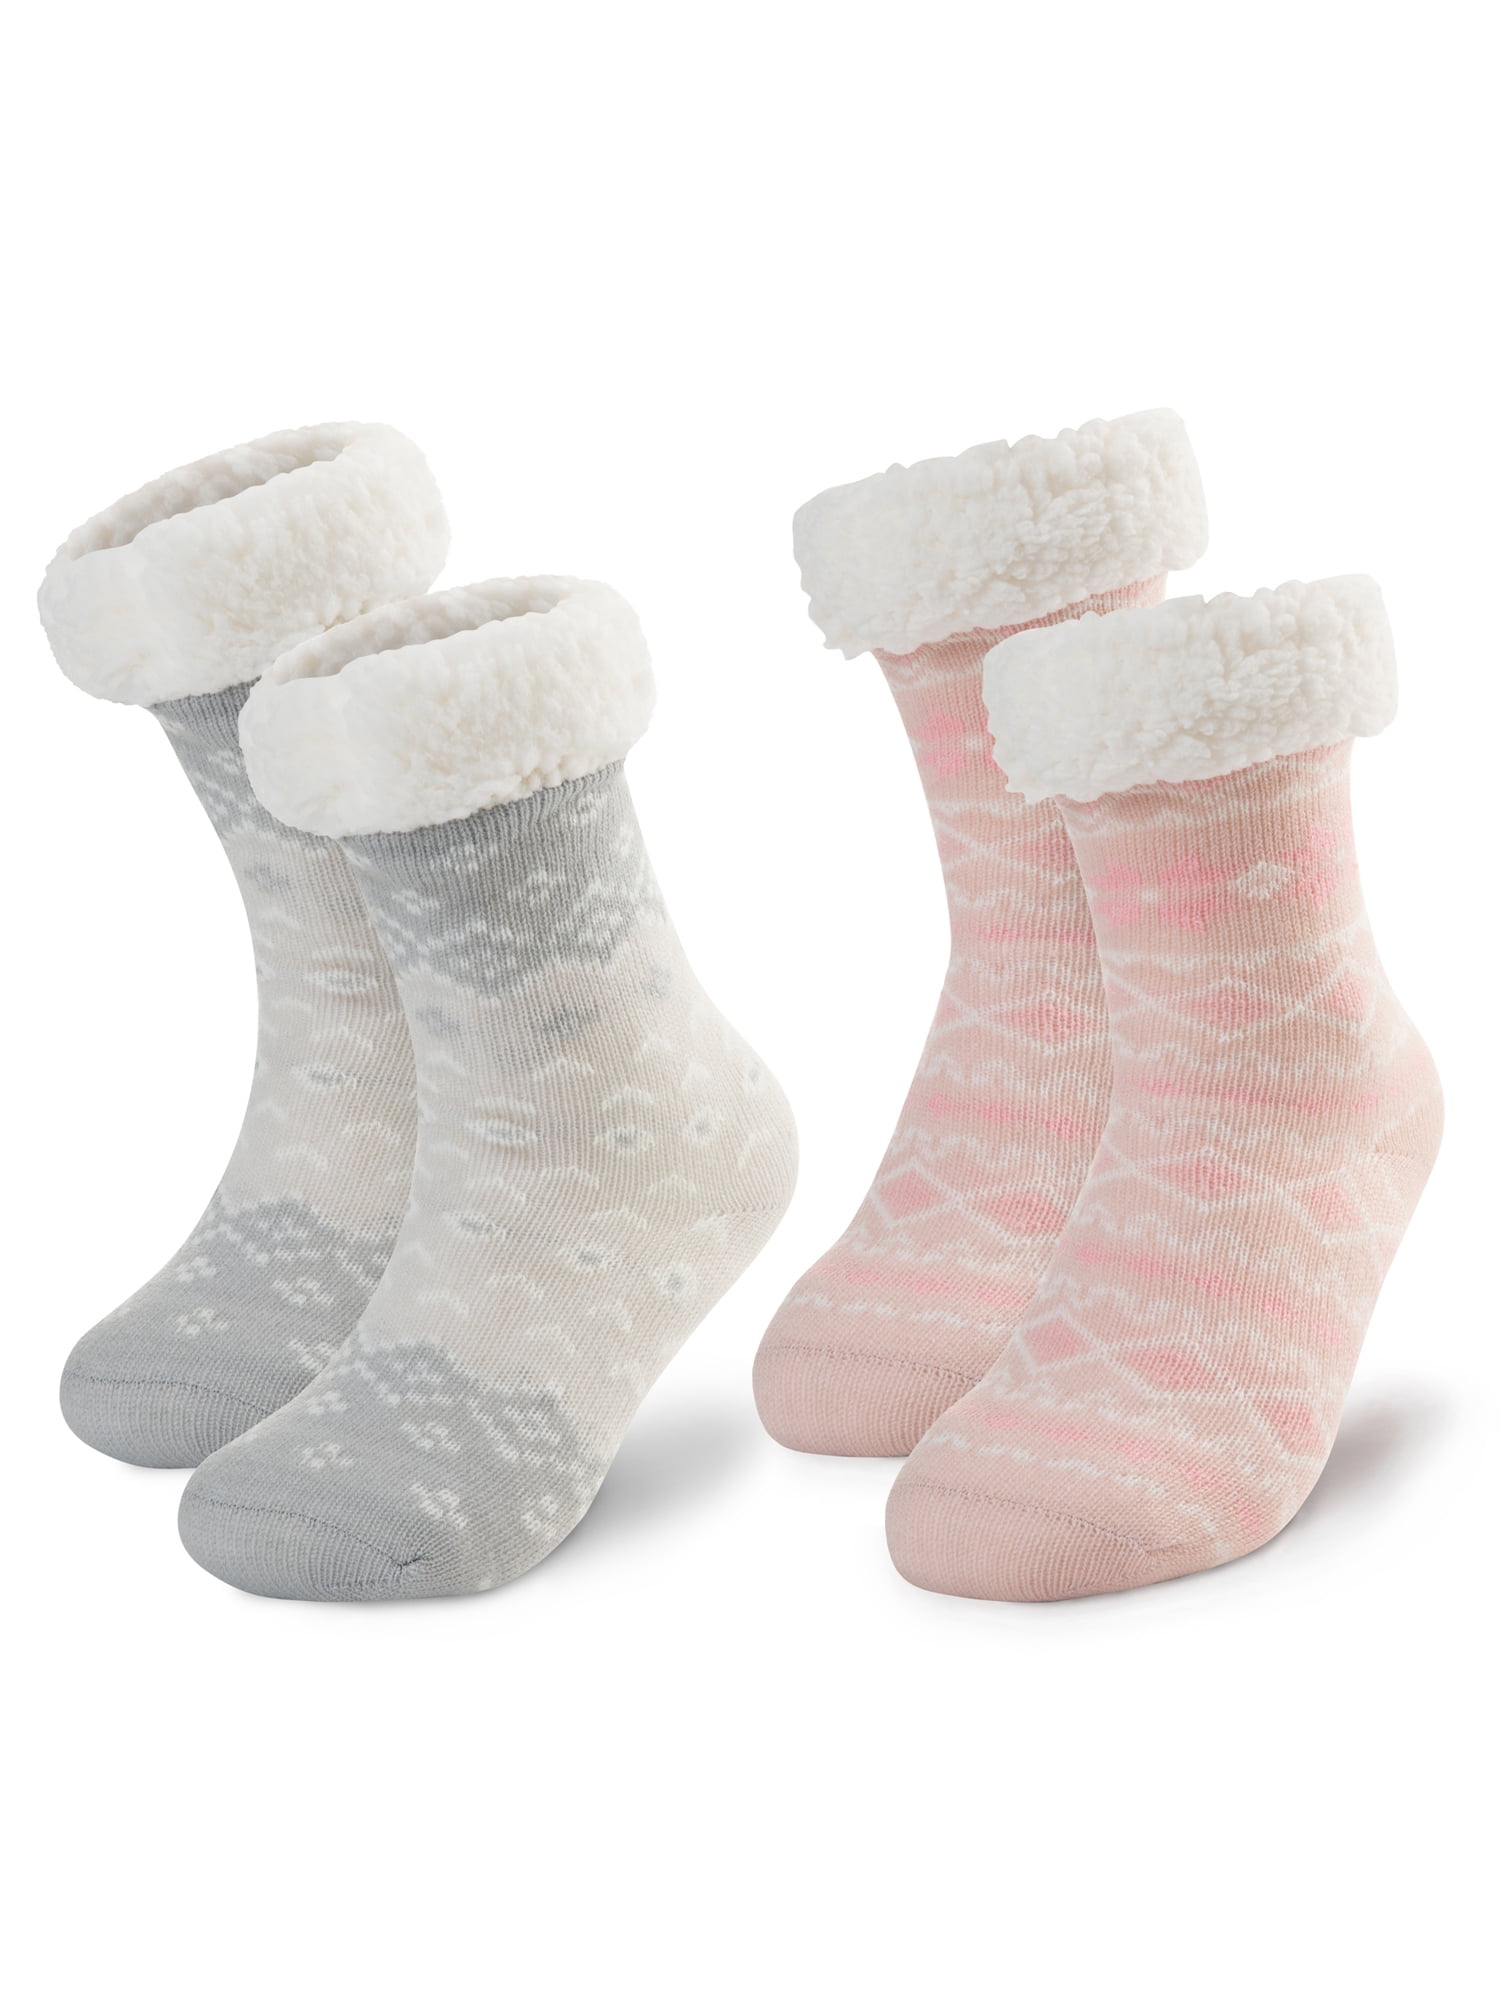 Treehouse Knits (2 Pack) Sherpa Slipper Socks for Kids with Grippers